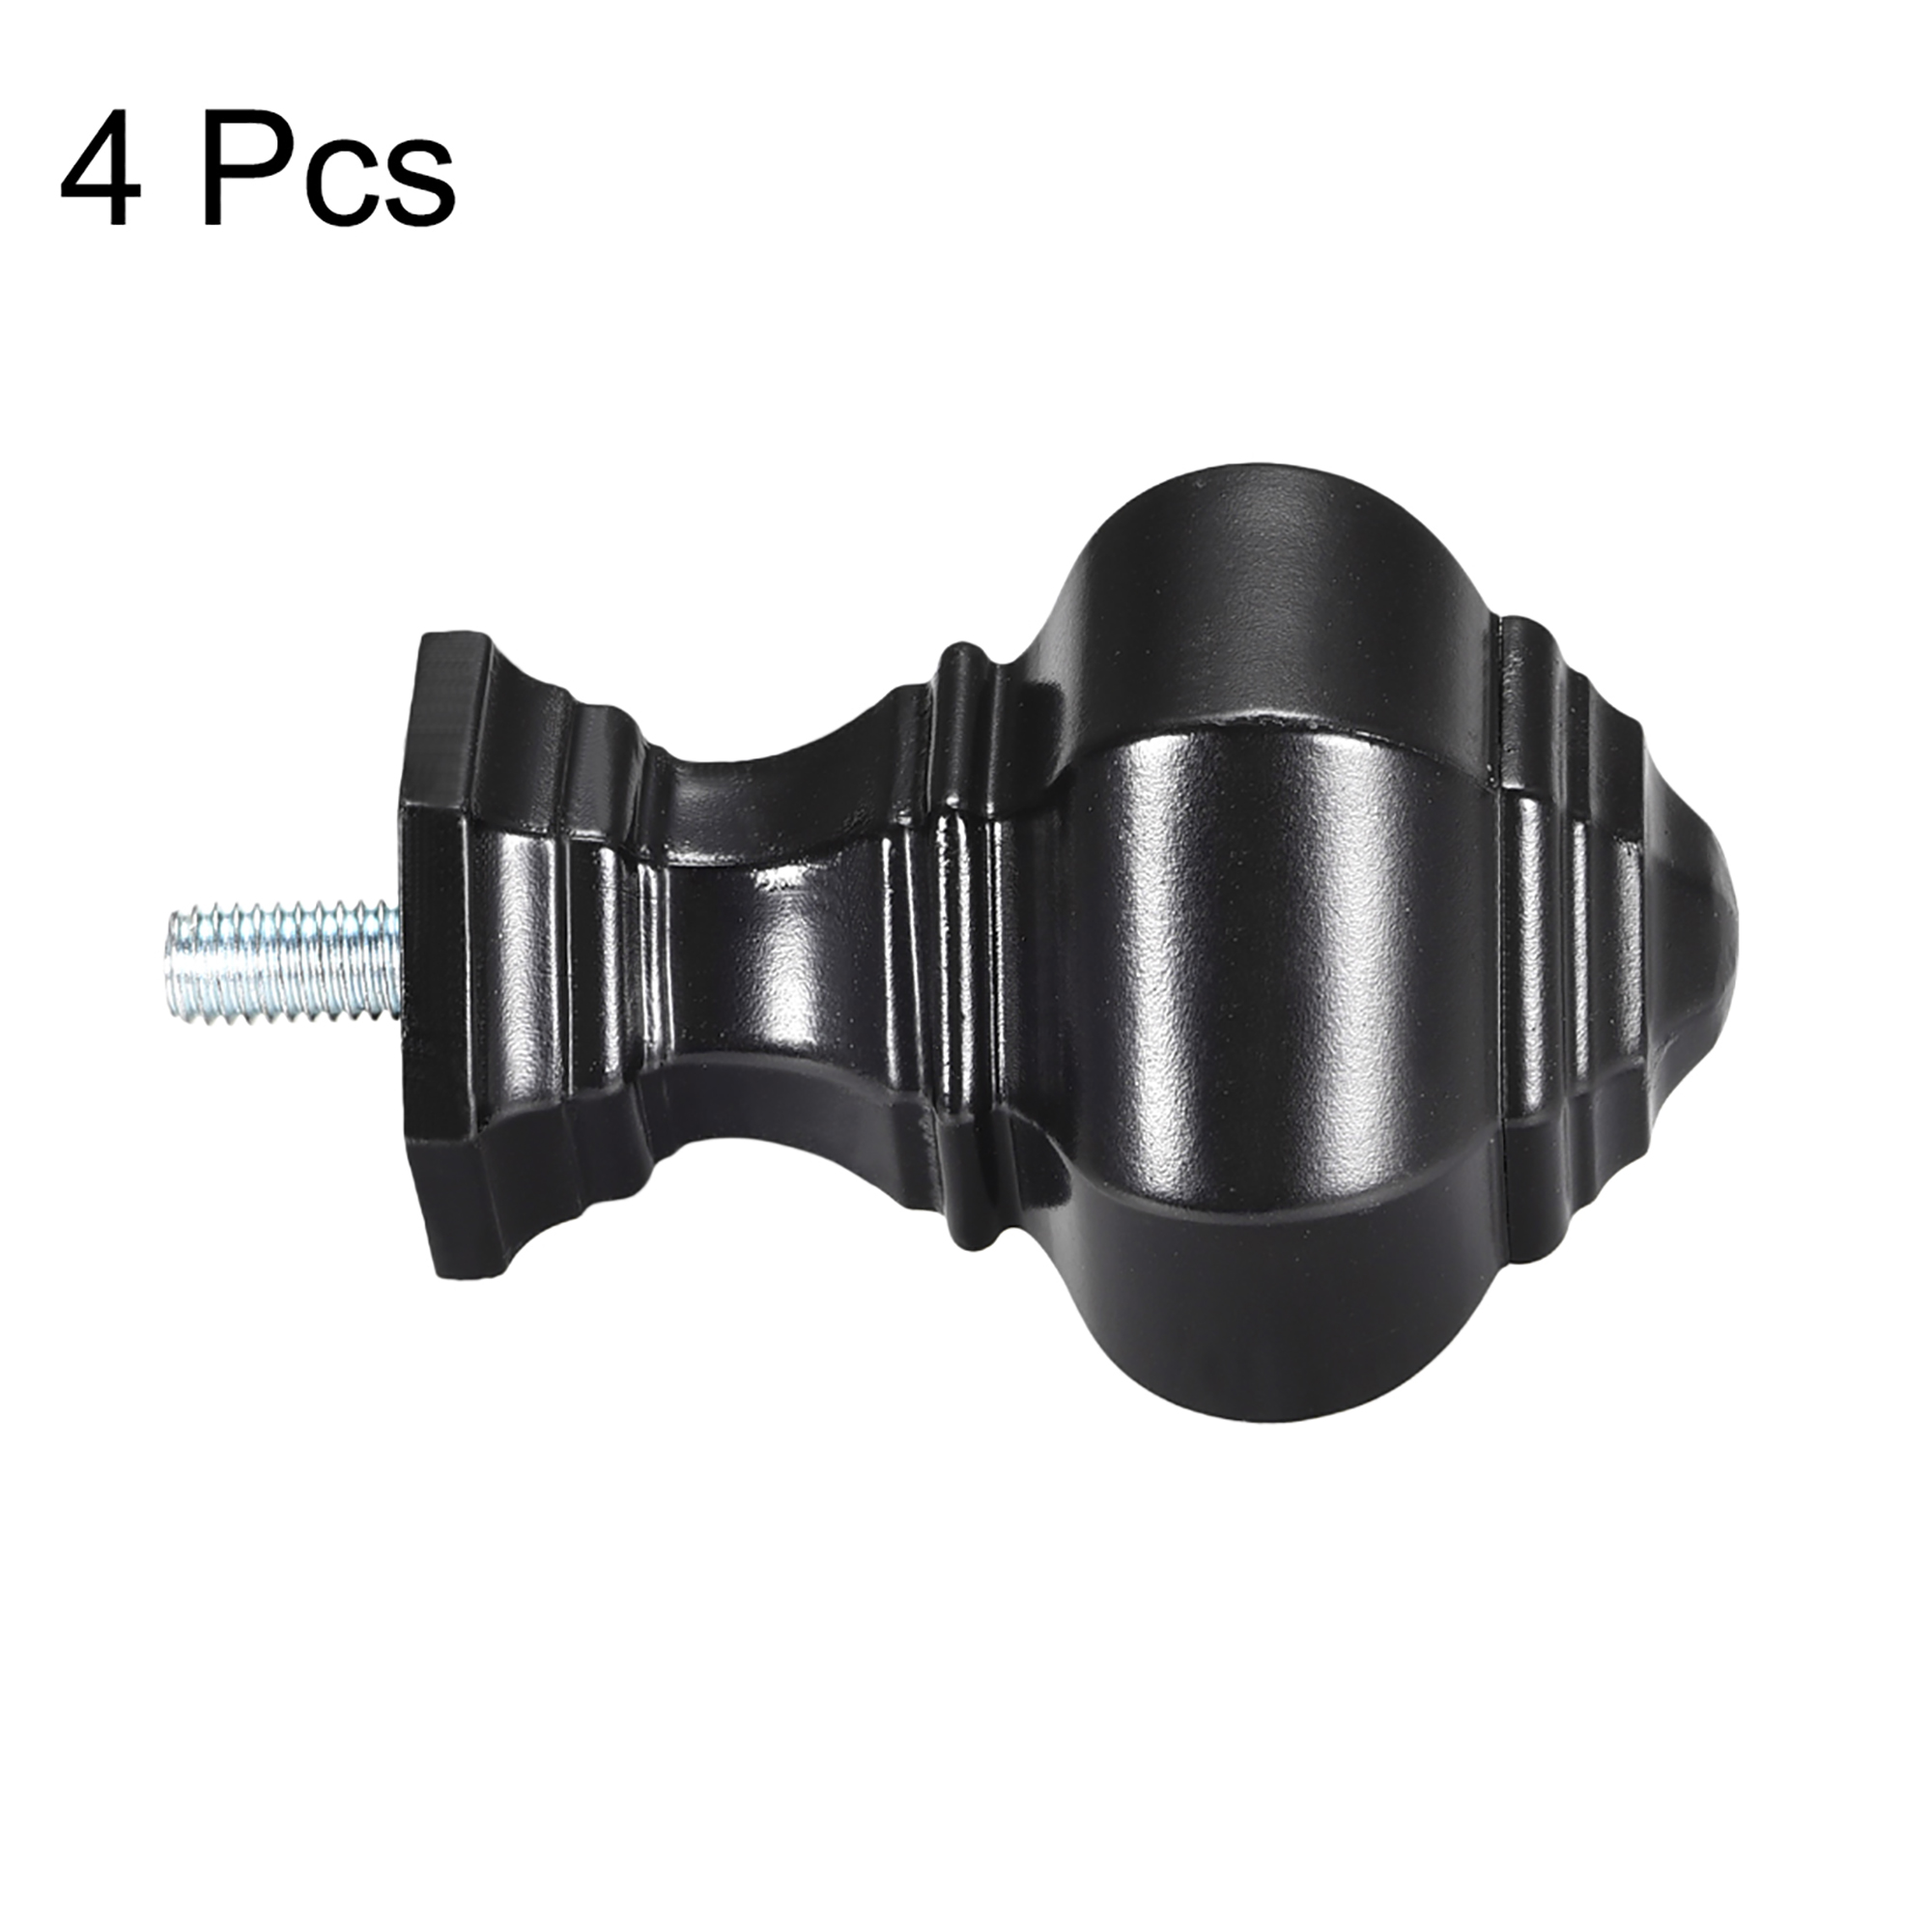 Uxcell 14mm Dia Curtain Rod Finials Plastic Black 4Pack - image 3 of 7